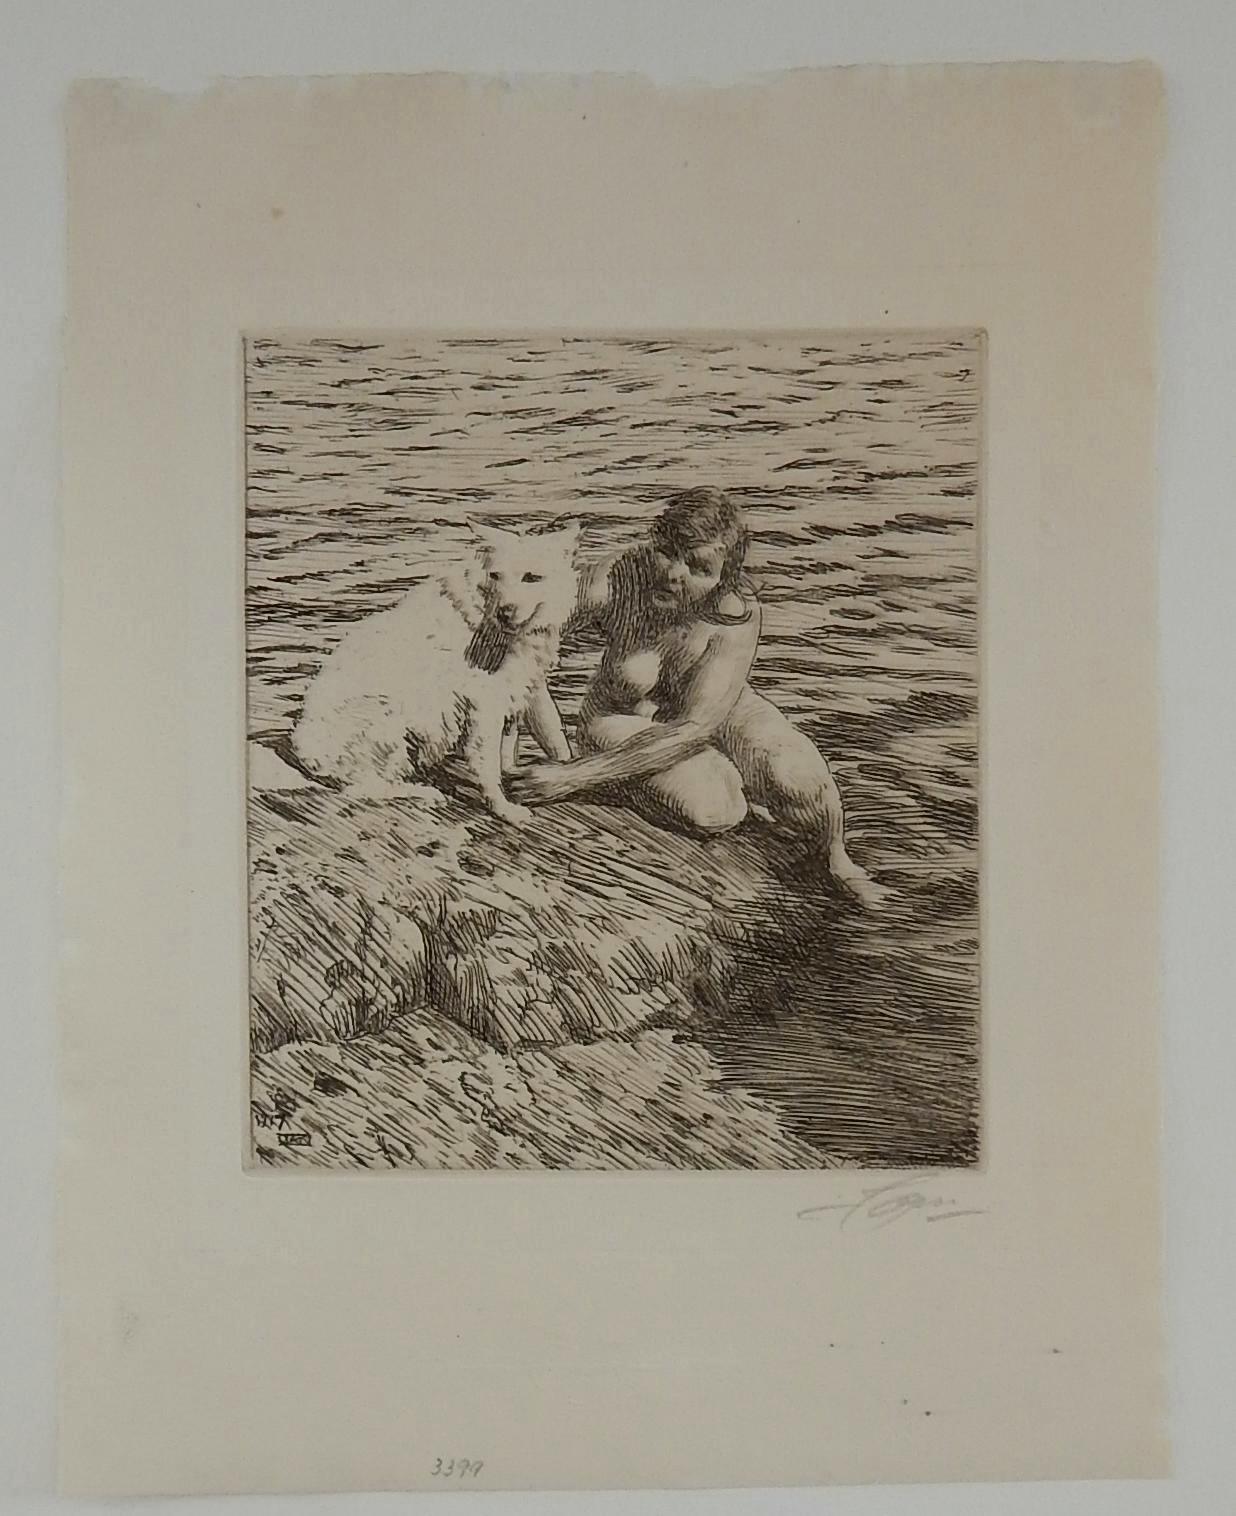 Lovely original etching, a portrait of a local girl and her dog by Anders Zorn (1860-1920) $1850
Created 1917 and titled “Sappho.